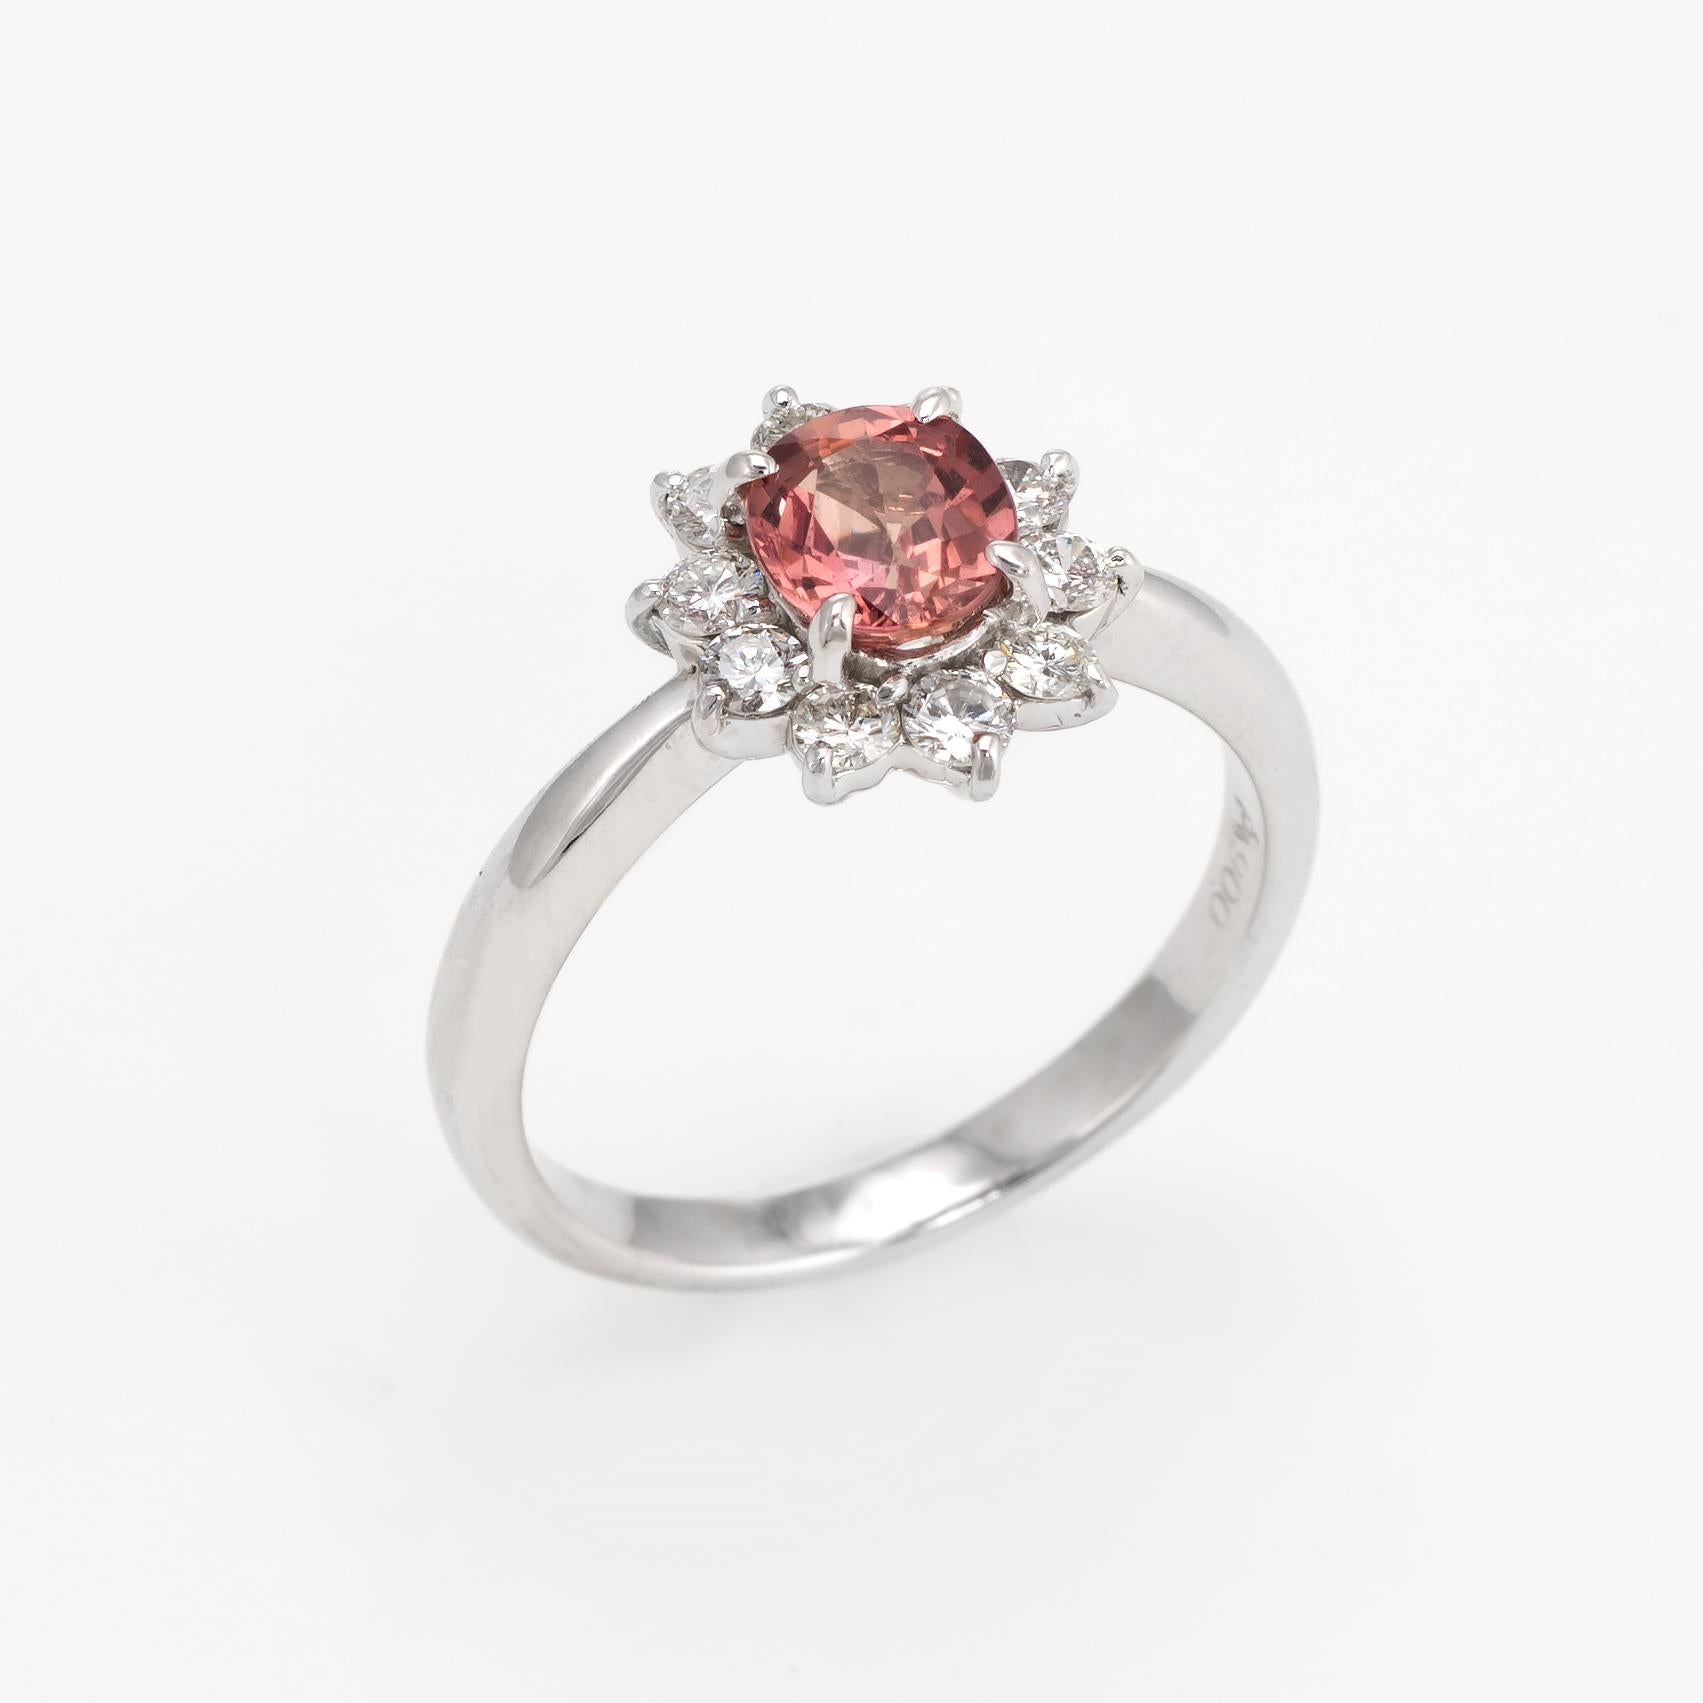 Elegant & finely detailed natural Padparadscha pink sapphire & diamond ring, crafted in 900 platinum. 

One oval shape mixed cut natural Padparadscha sapphire, 0.77 carats (5.95 x 5.00 x 3.05 mm), medium pinkish-brownish orange color, lightly